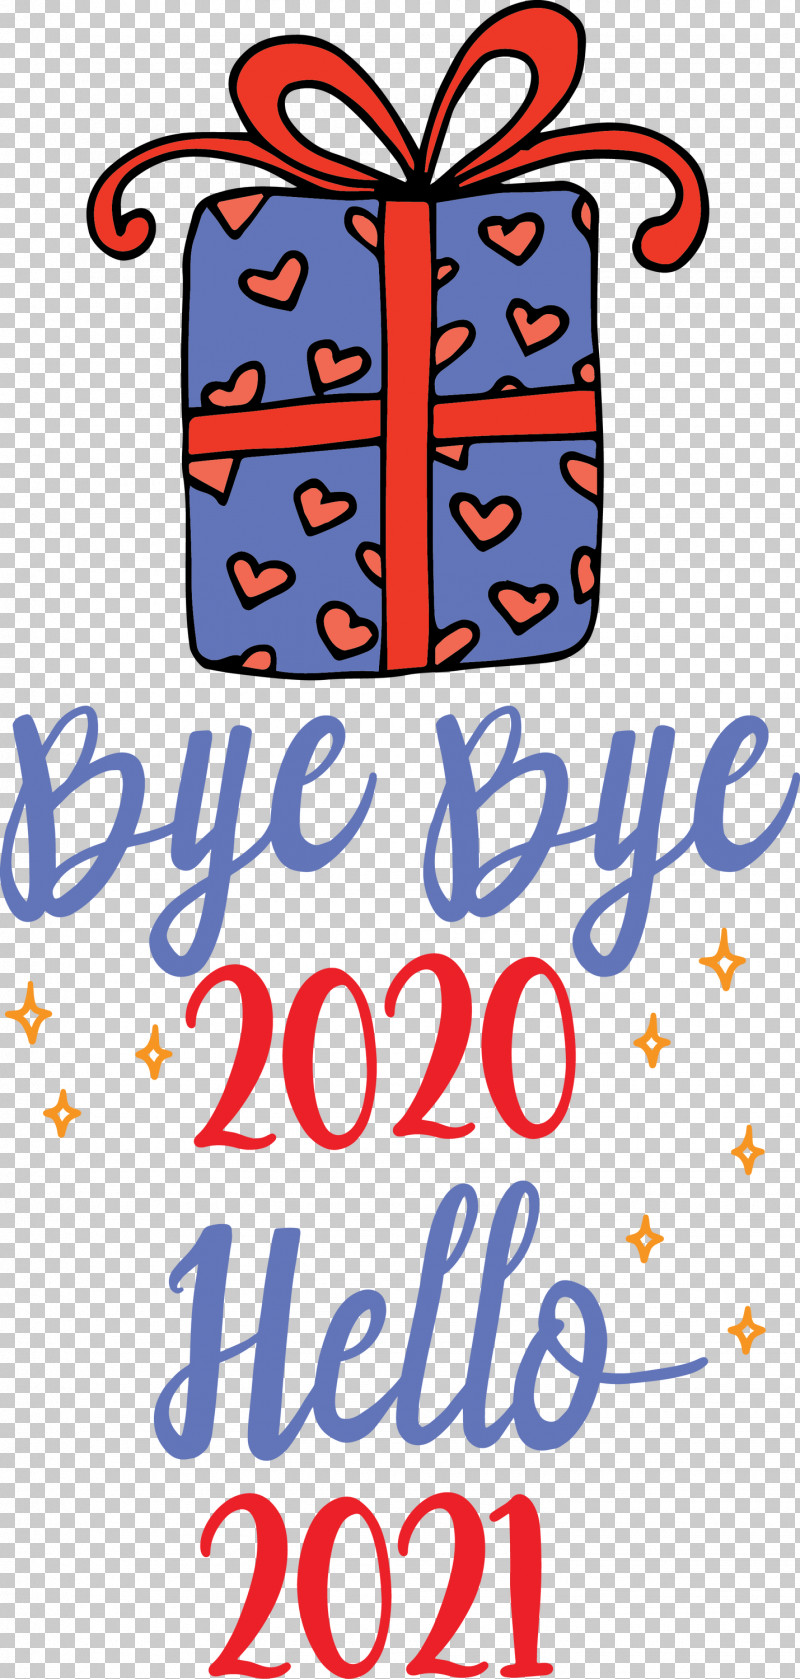 Hello 2021 Year Bye Bye 2020 Year PNG, Clipart, Bye Bye 2020 Year, Geometry, Hello 2021 Year, Line, Mathematics Free PNG Download